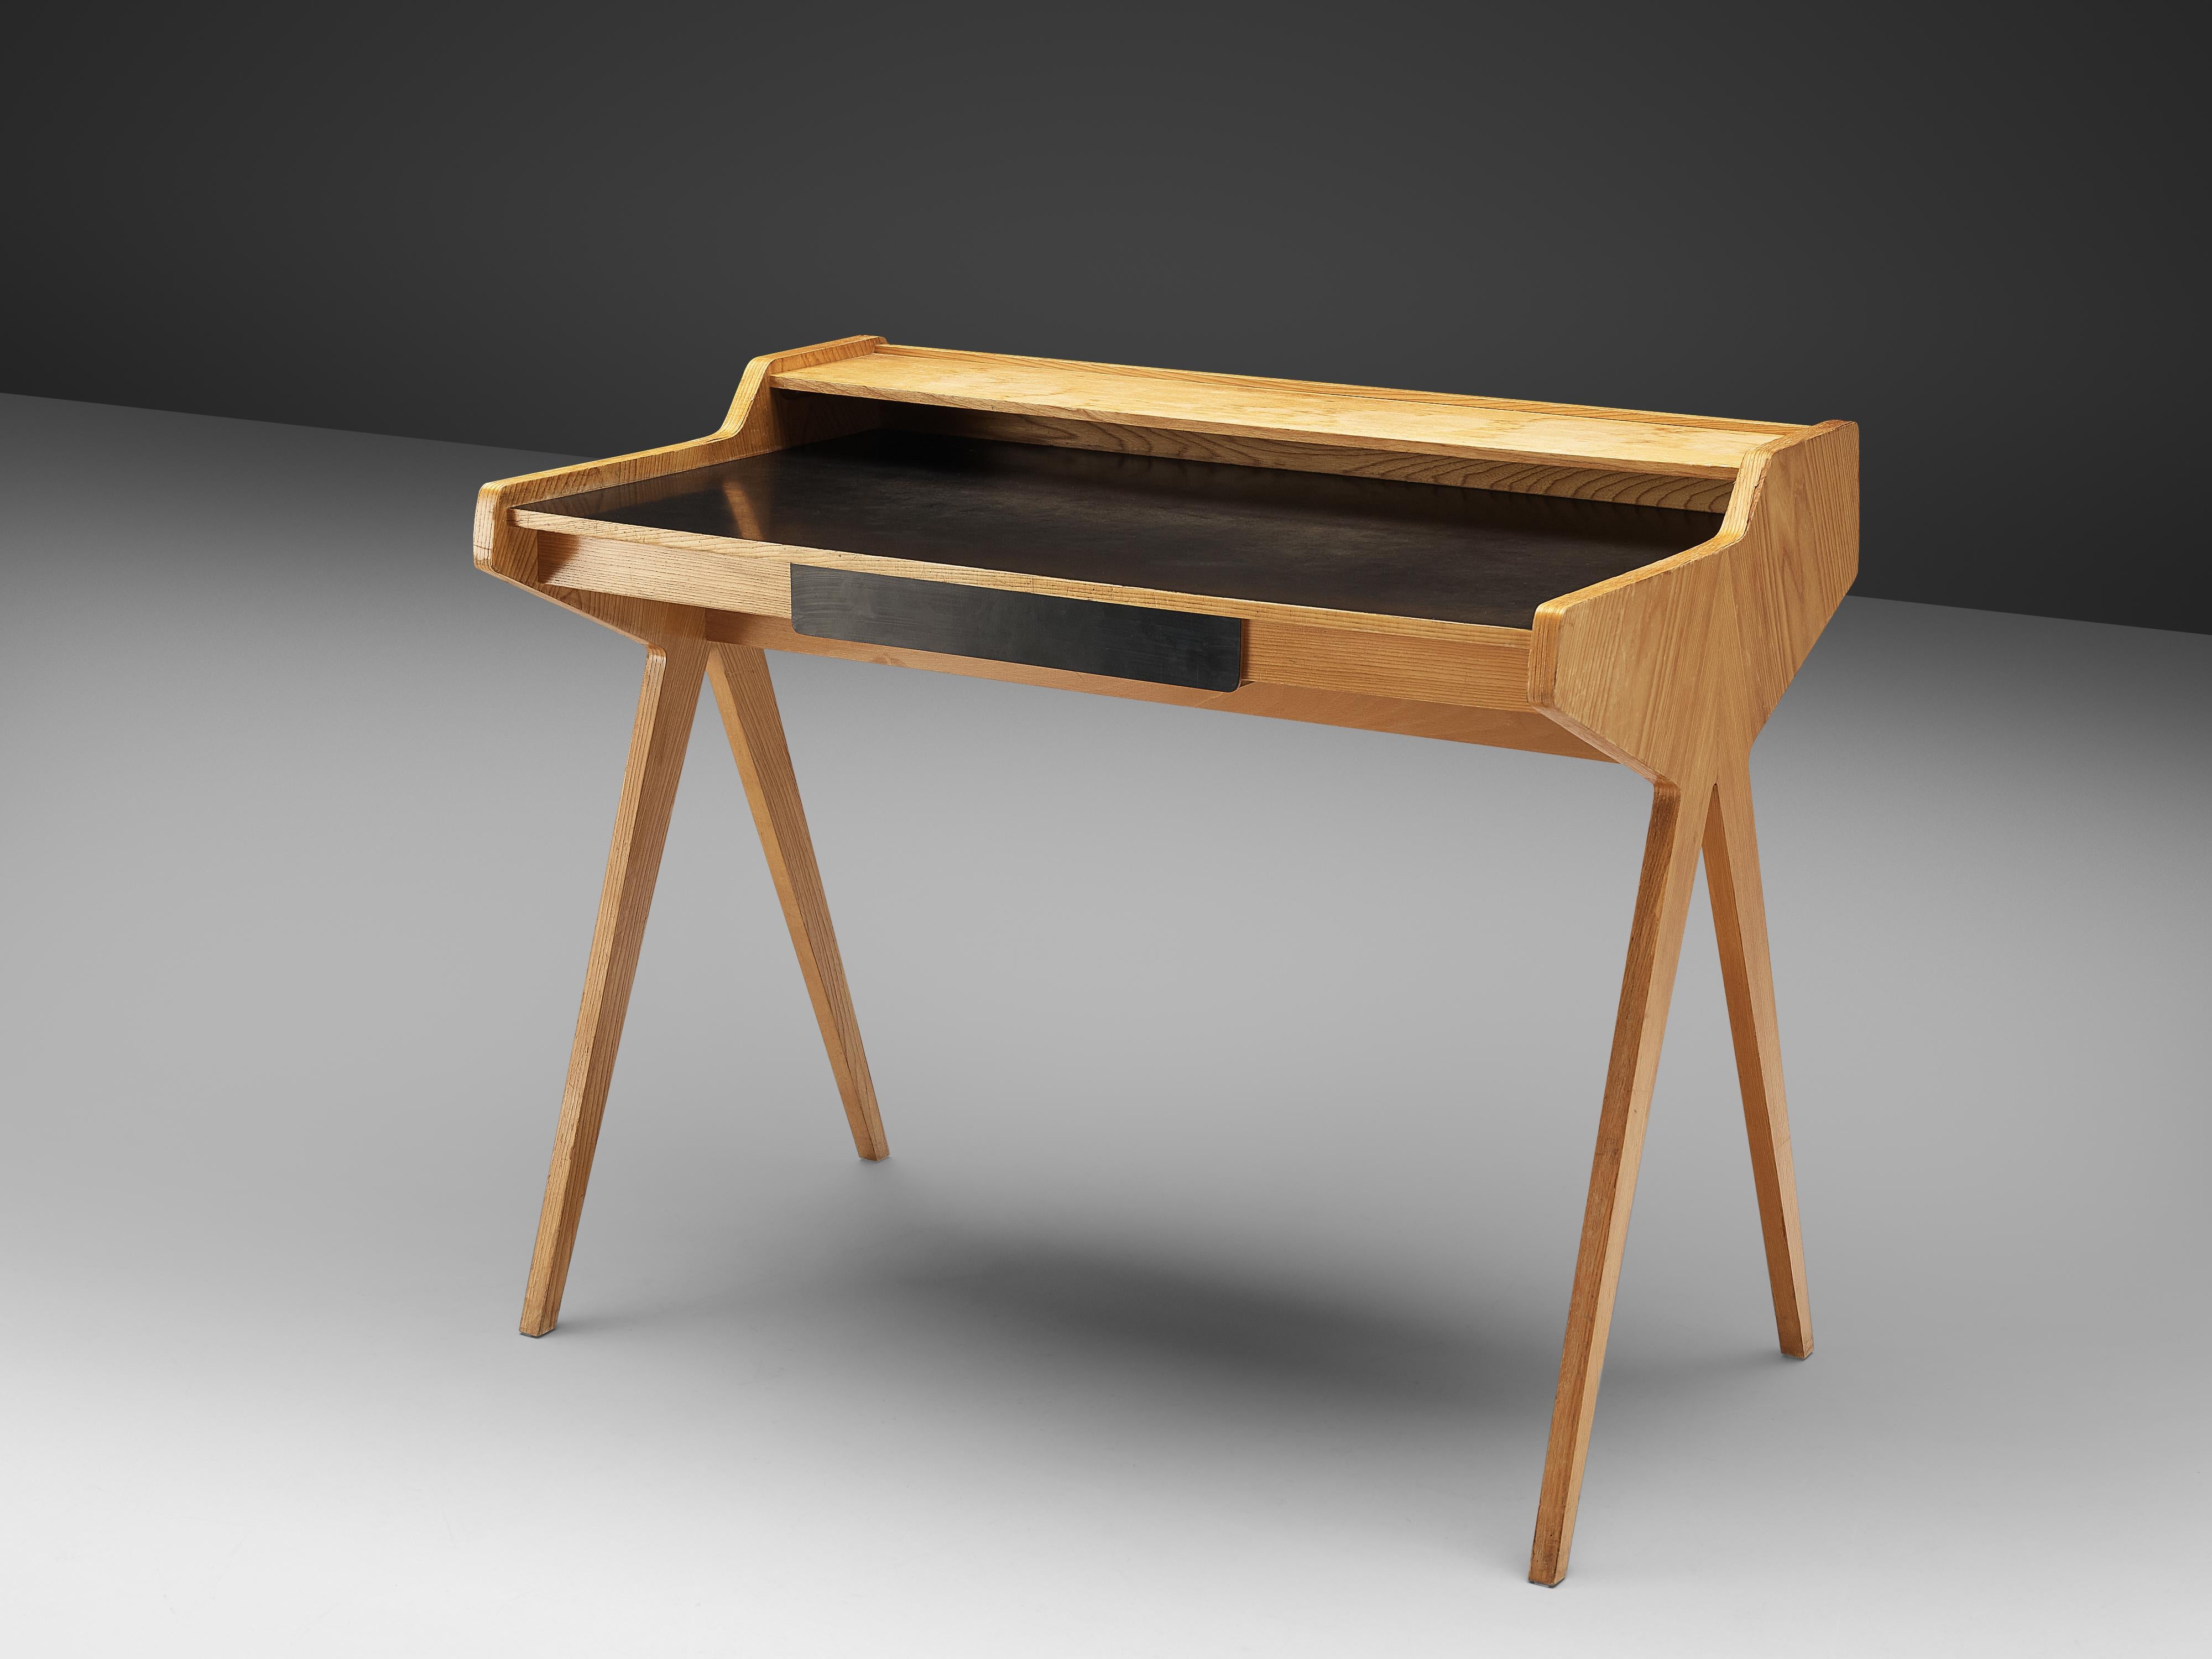 Helmut Magg for WK Möbel, veneerd cherrywood, Germany, 1950s

This ‘lady desk’ by German architect and furniture designer Helmut Magg (1927-2013) breathes the aesthetics of 1950s design. Two V-shaped, tapered legs lift up the table. The top is